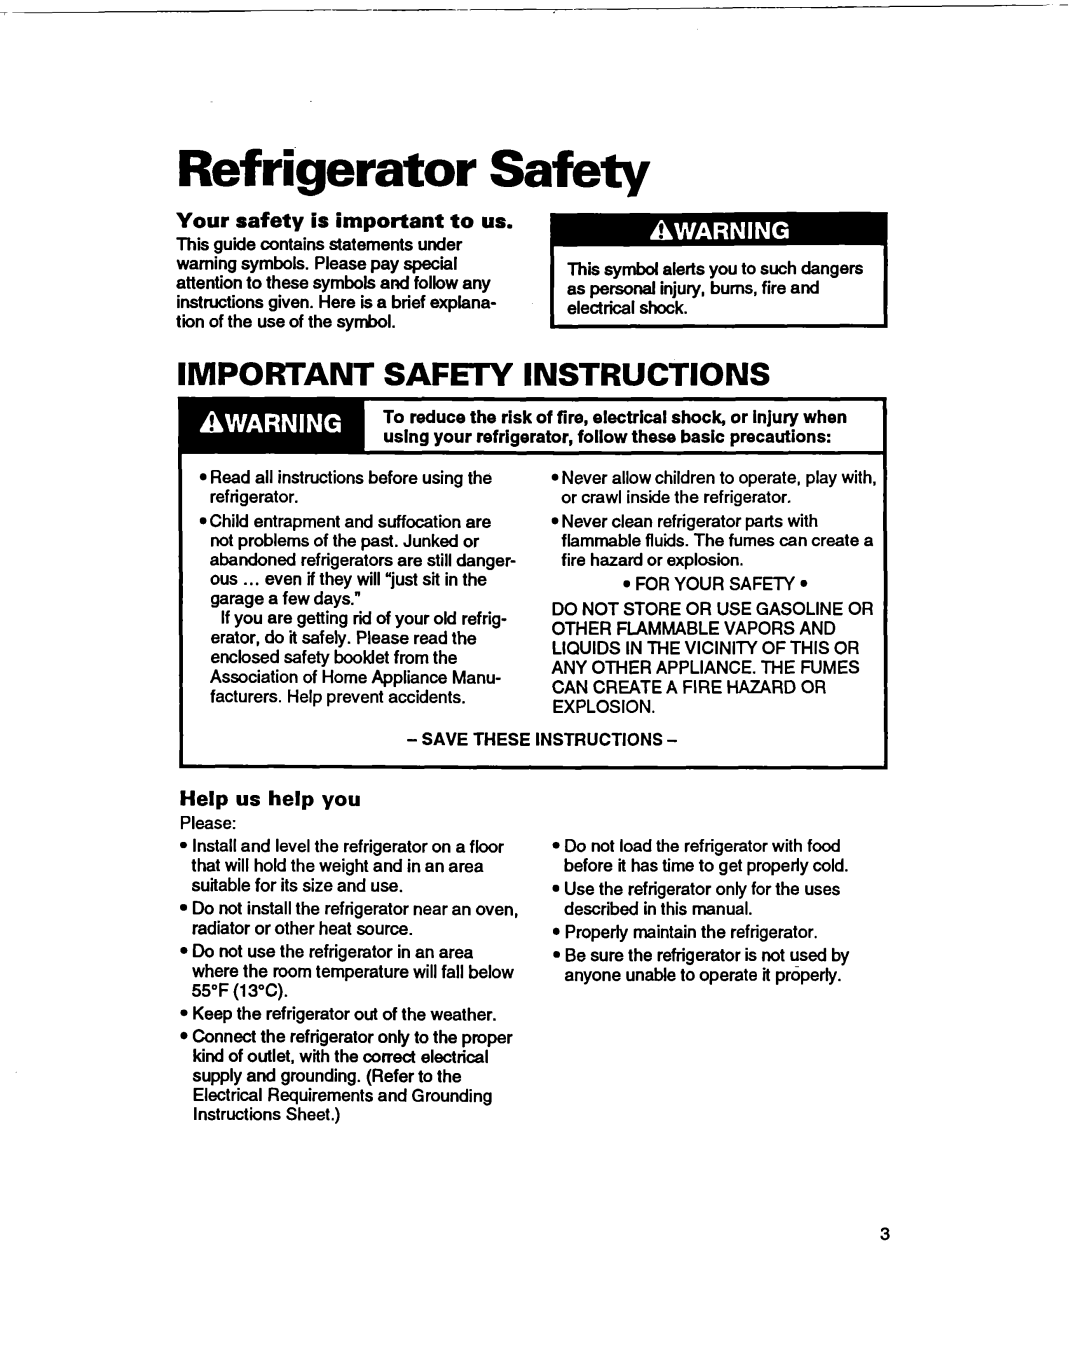 Whirlpool RT20DKXDN00 Refrigerator Safety, IMPOWANT SAFEl-YINSTRUCTIONS, Your safety is important to us, Help us help you 